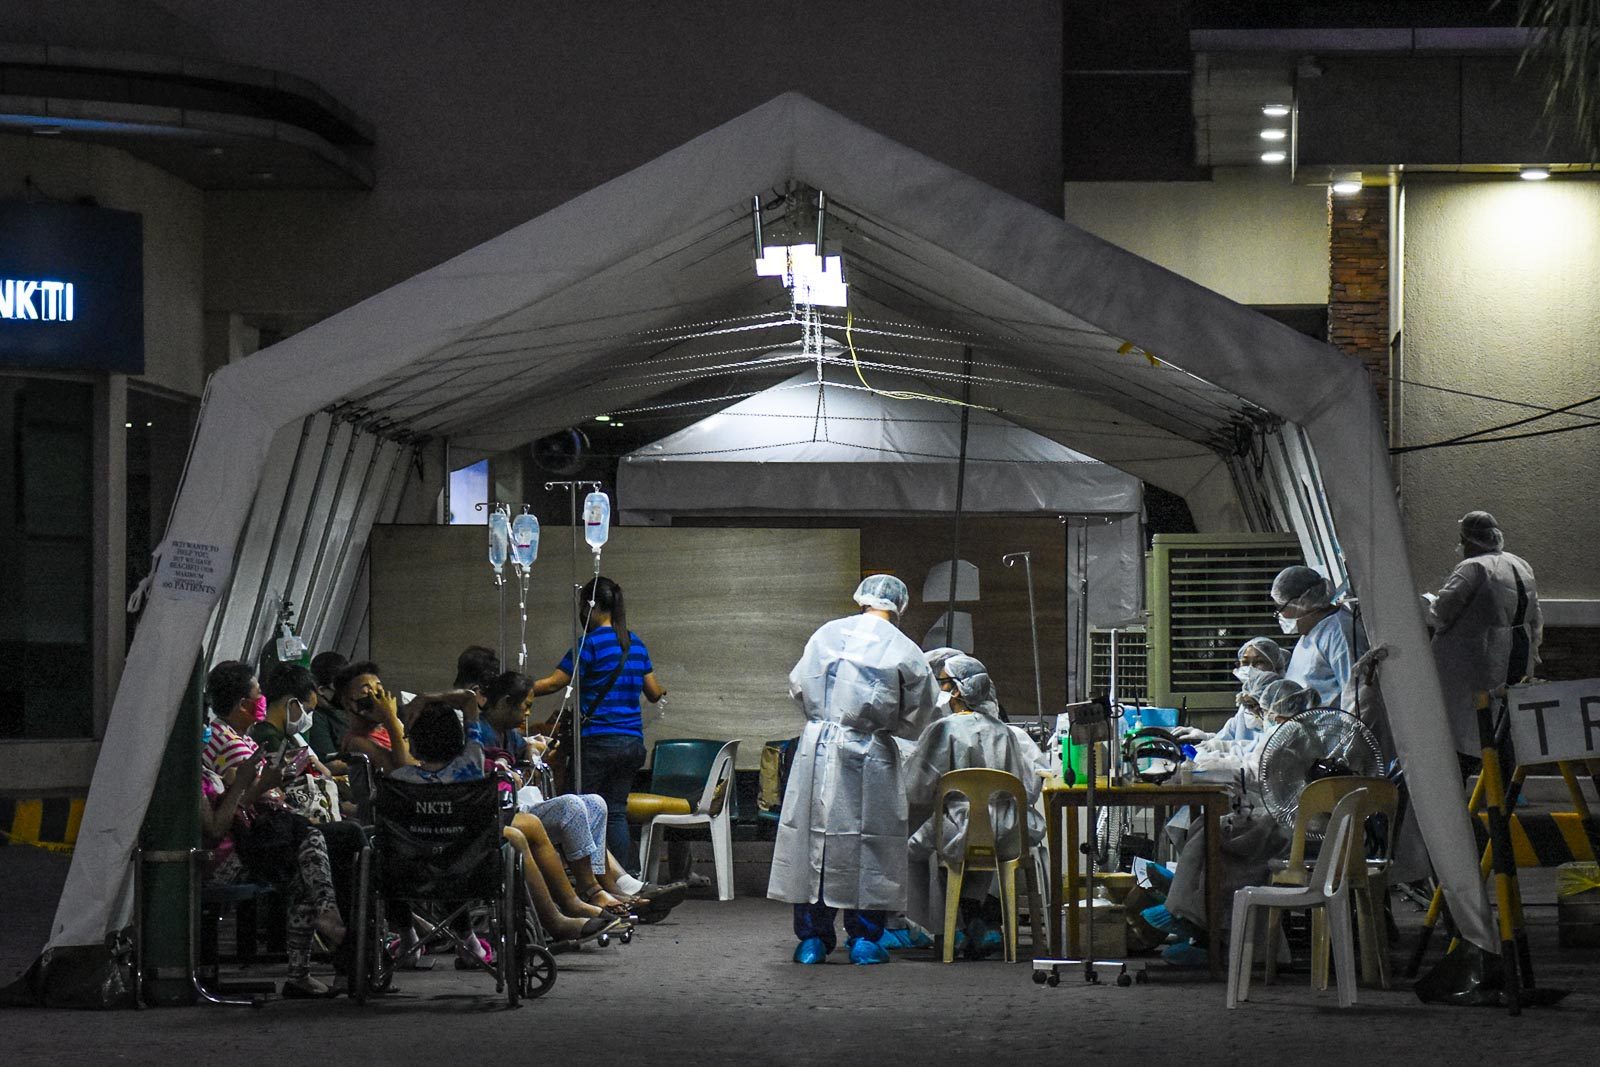 Philippines records almost 200,000 excess deaths during the pandemic